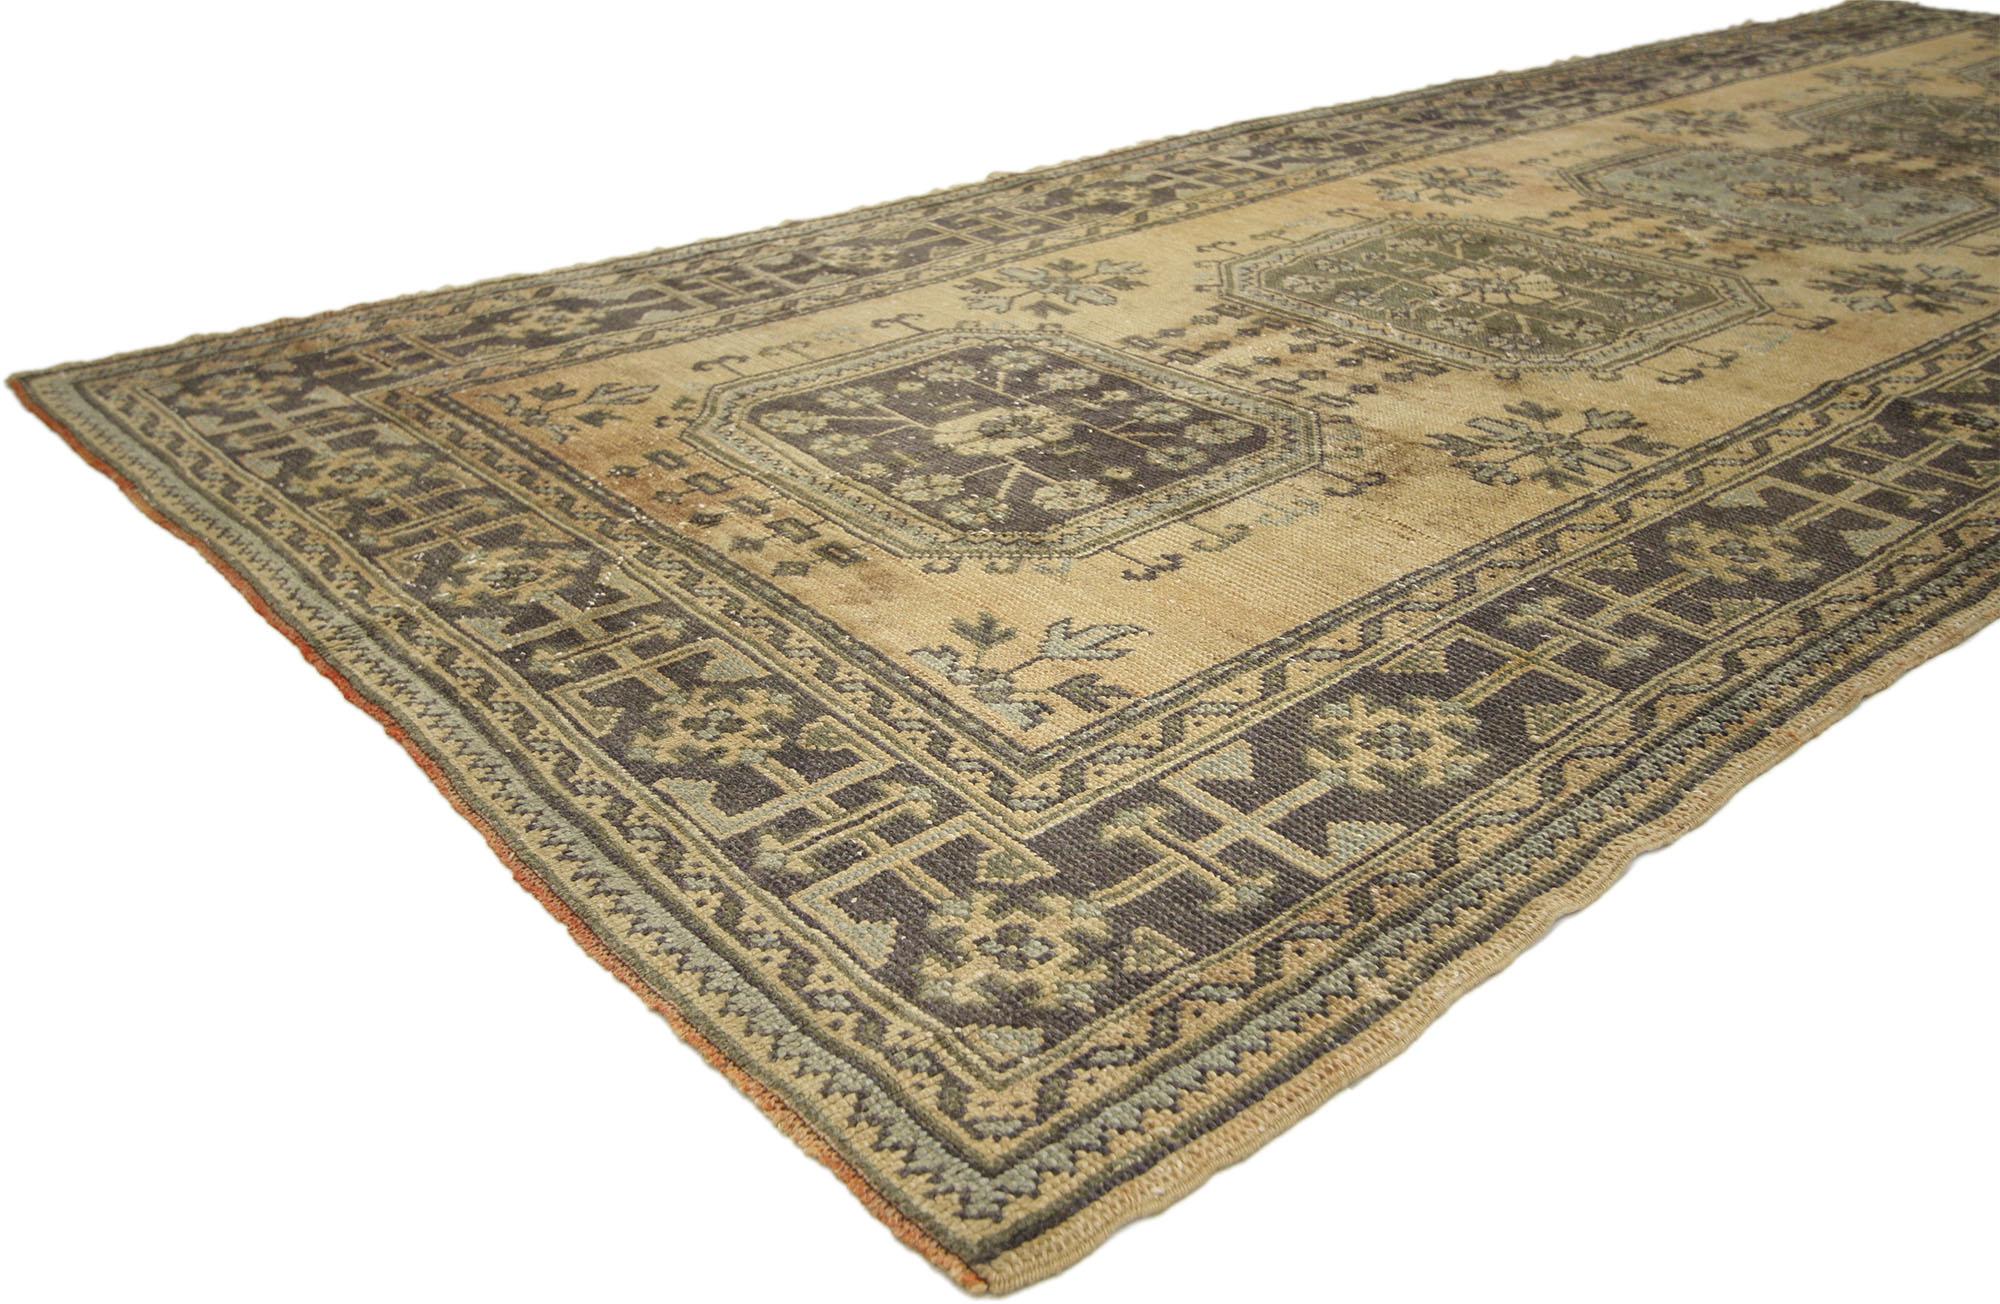 51143, vintage Turkish Oushak Hallway runner with Gustavian or French Country style. This hand knotted wool vintage Turkish Oushak runner features five amulet medallions filled with roundels and floral sprays floating on an abrashed ecru field